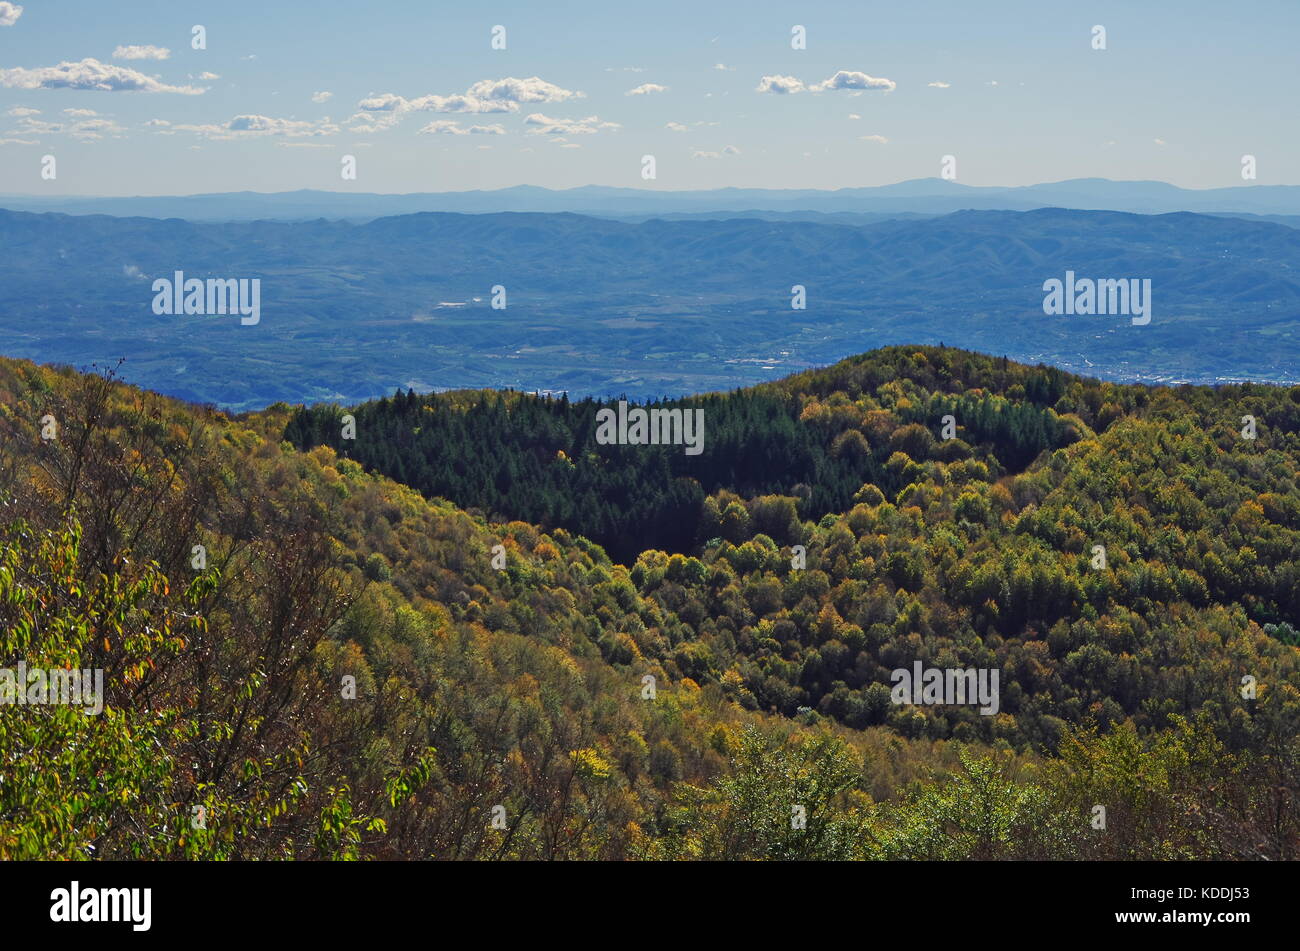 View of Valdarno from Pratomagno. Tuscany countryside. Stock Photo